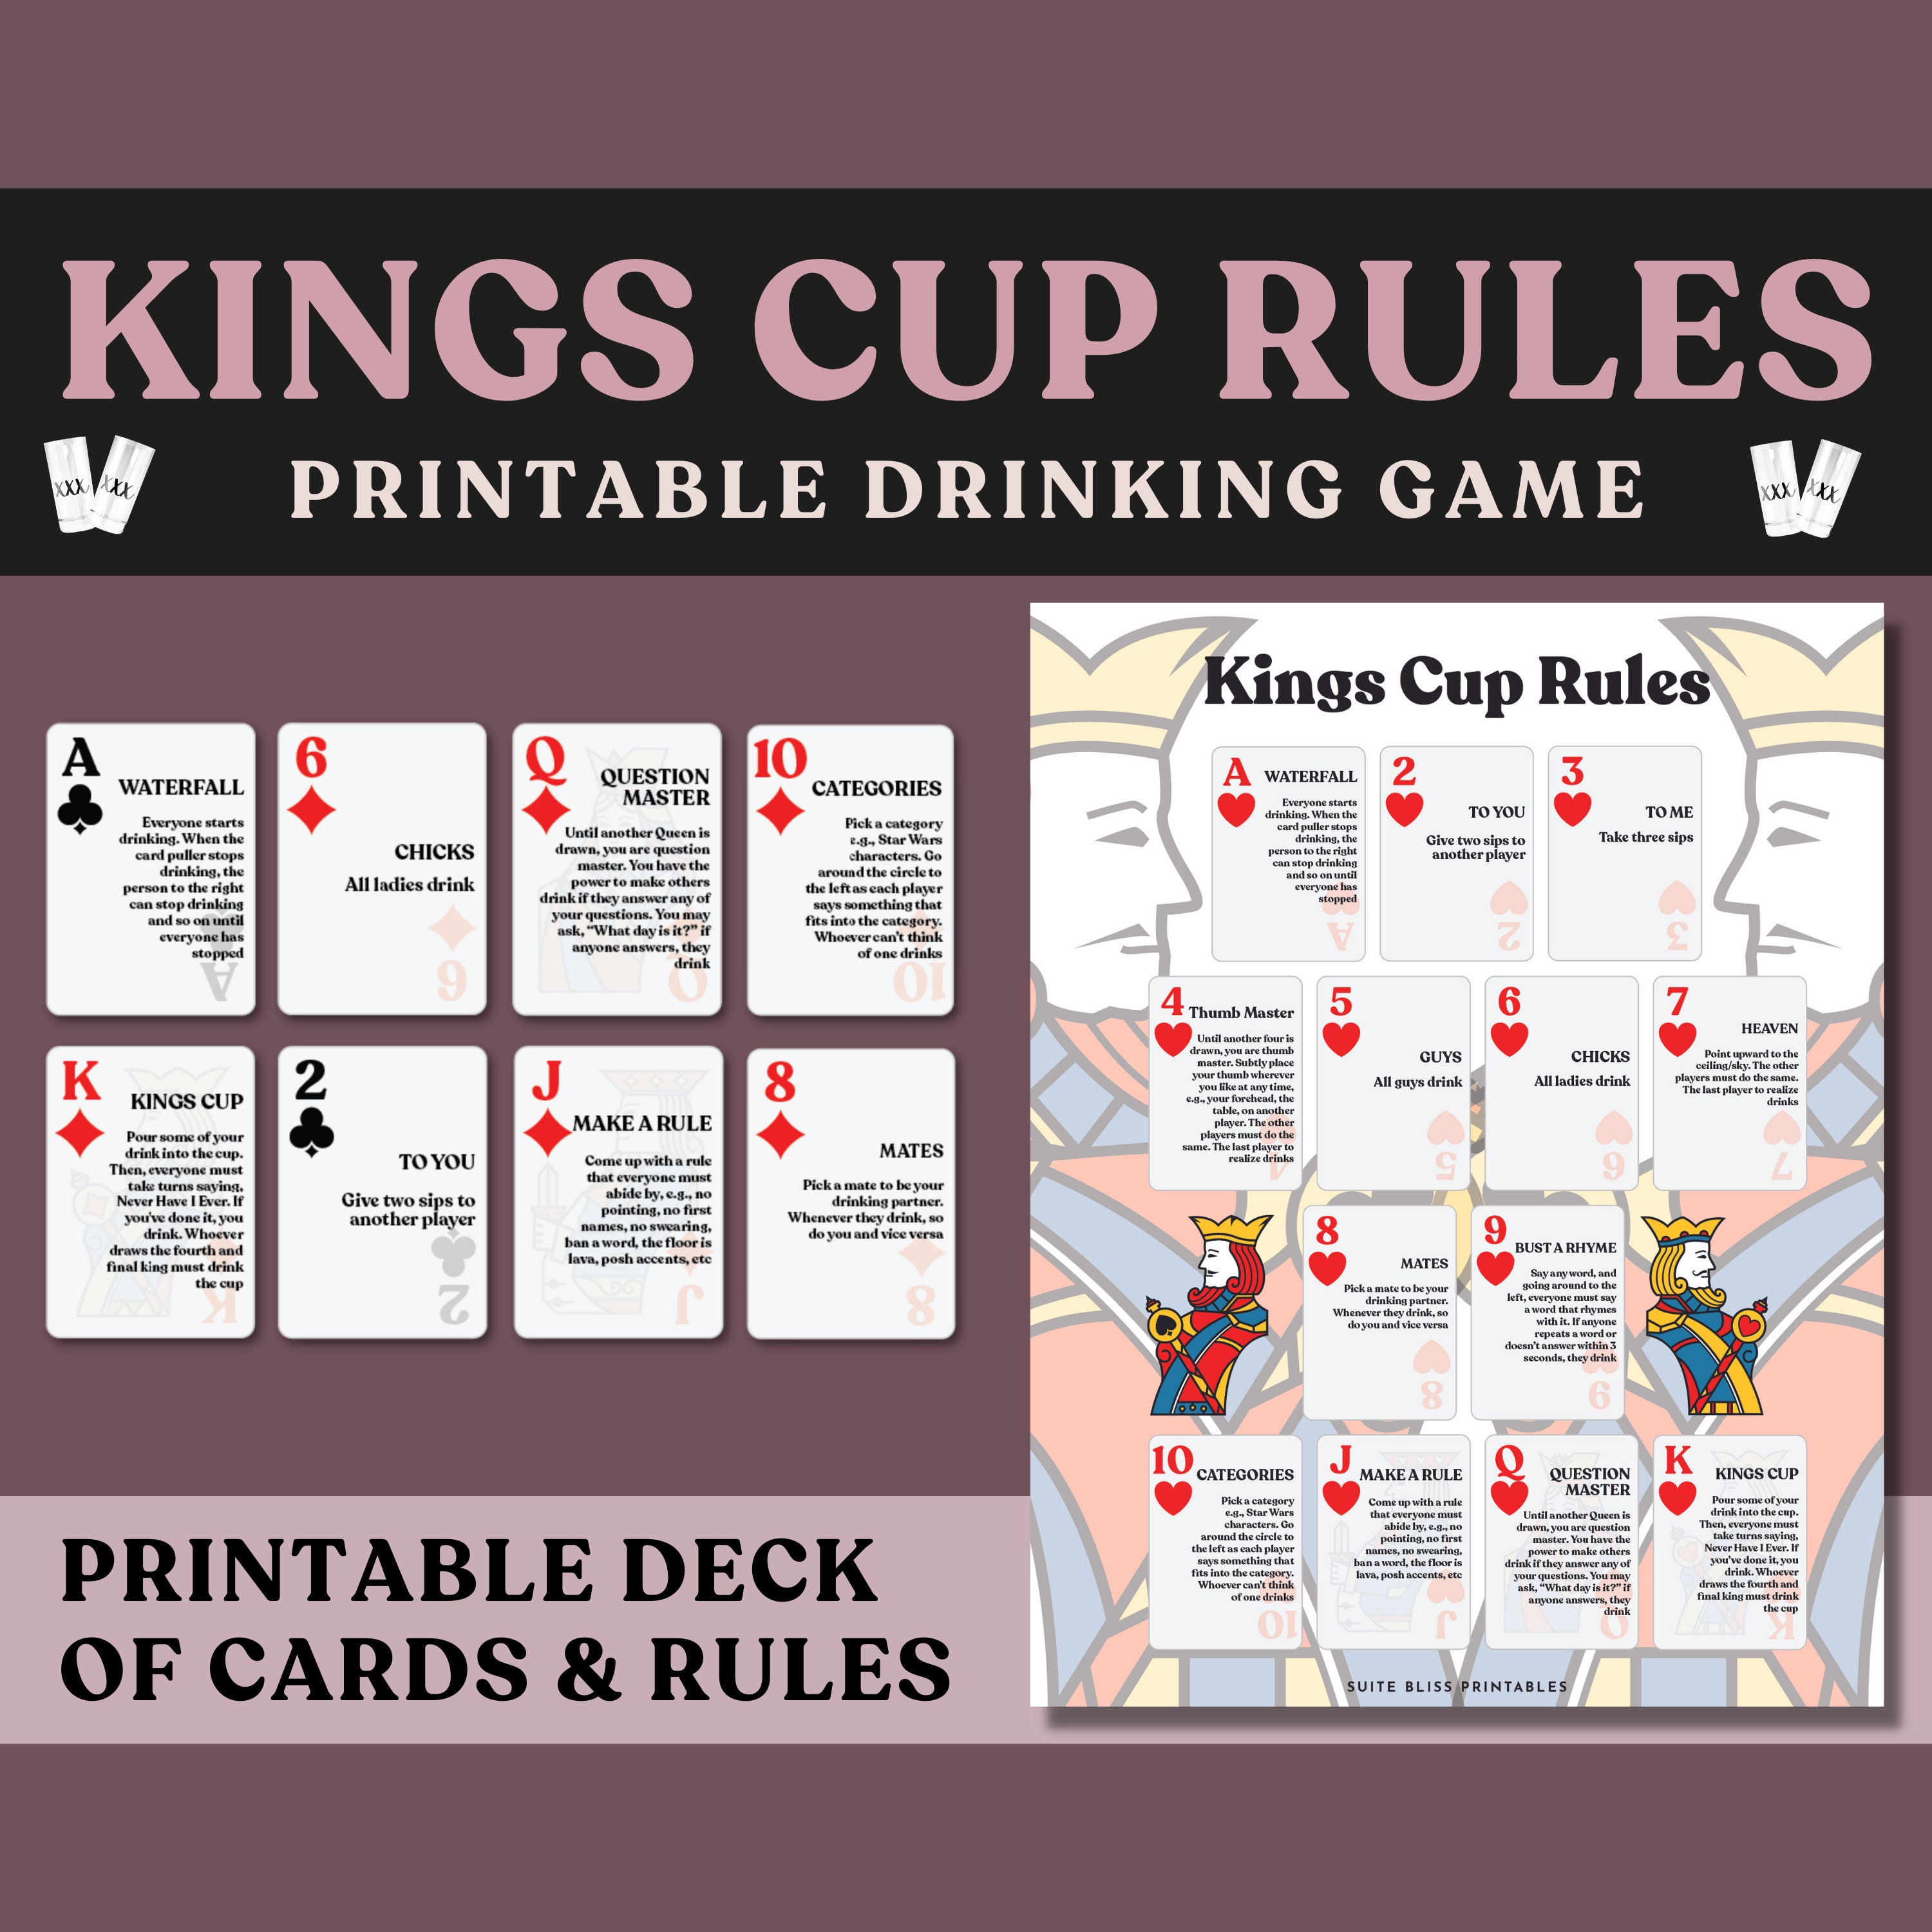 King's Cup Rules: How to Play the Classic Drinking Game, Bar Games 101